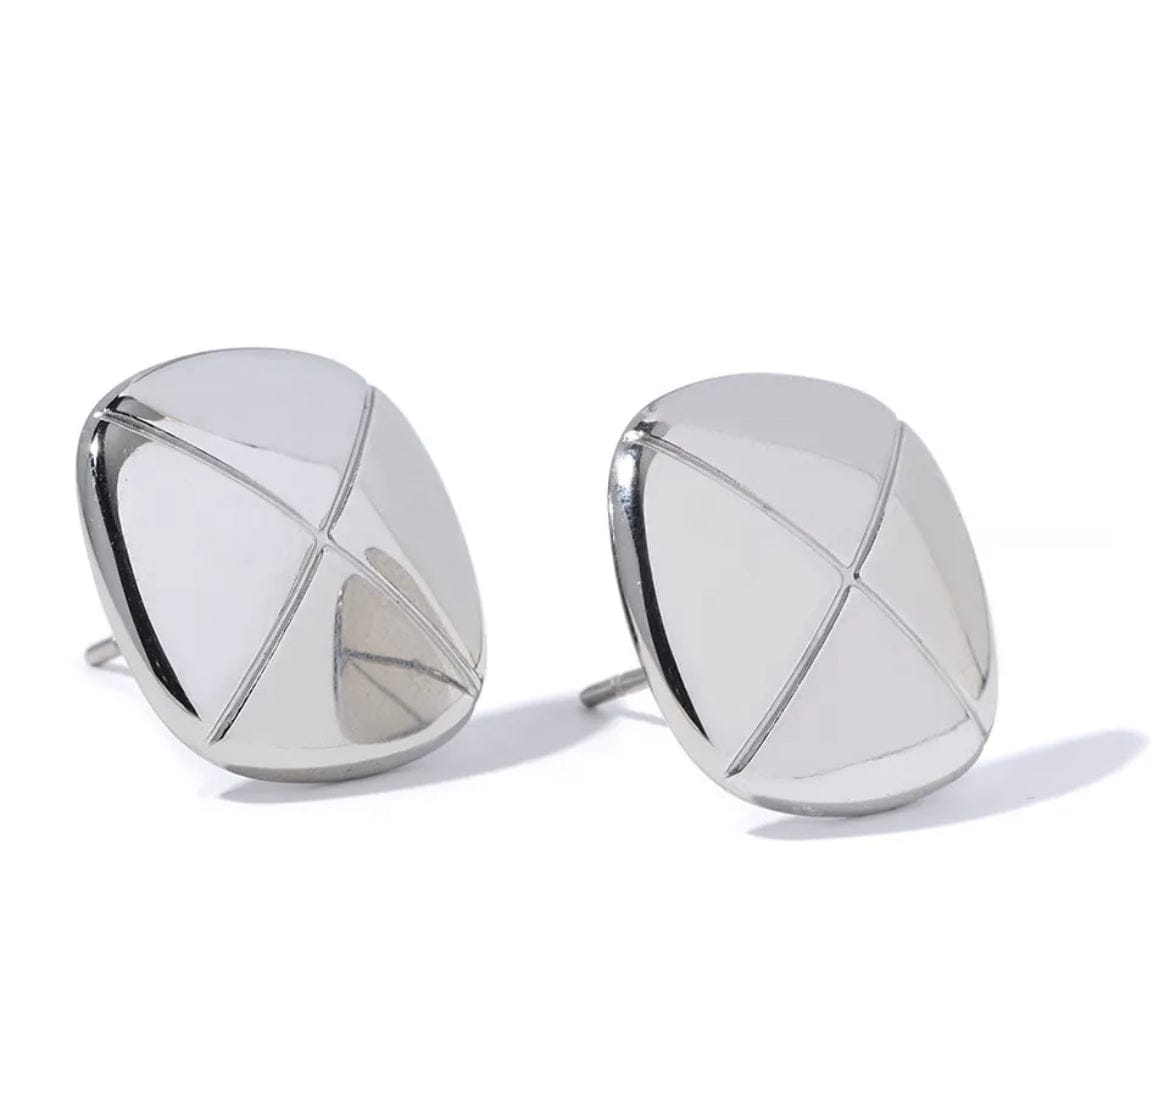 Dona Trend Jewelry Silver Squared Button Earrings